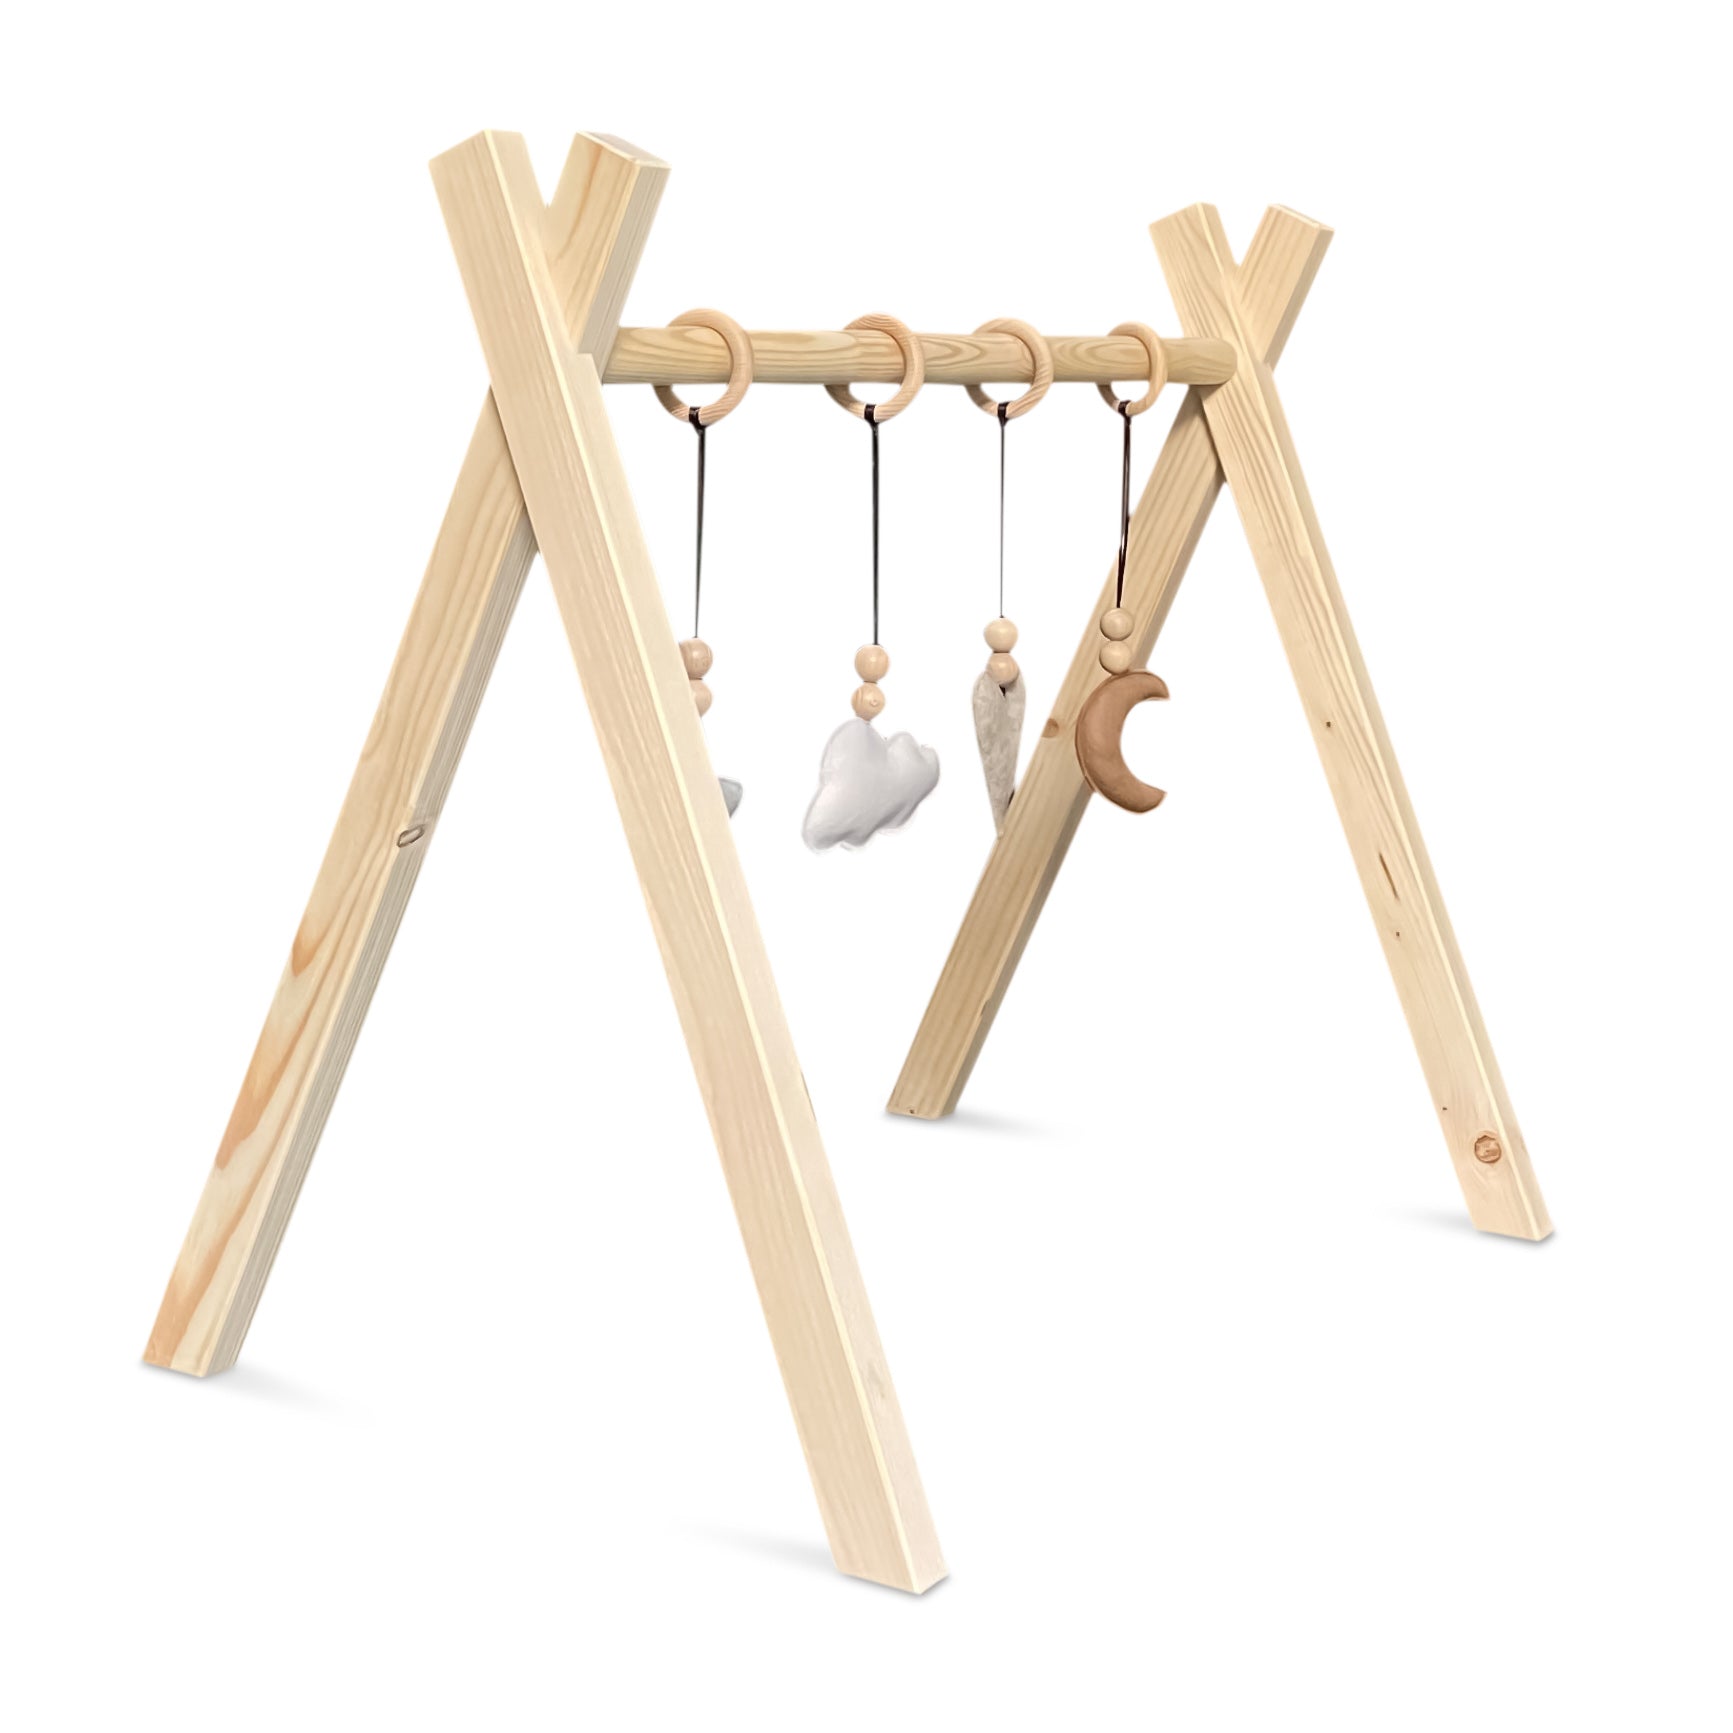 Wooden baby gym, with natural felt hangers - toddie.com